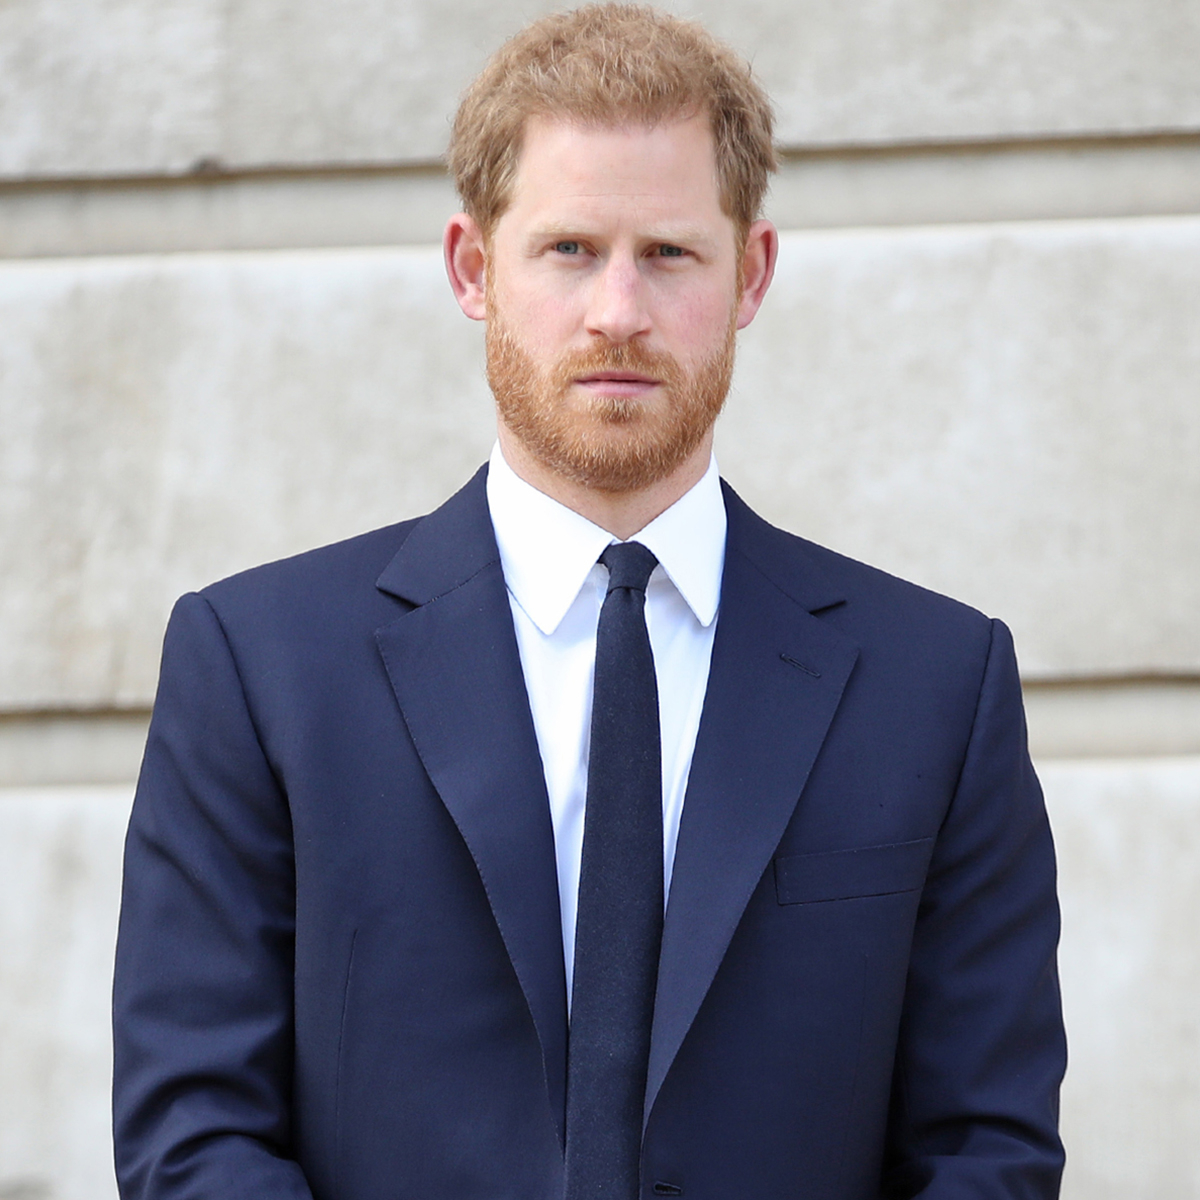 Prince Harry’s friend says he is ‘sad’ about royal alienation